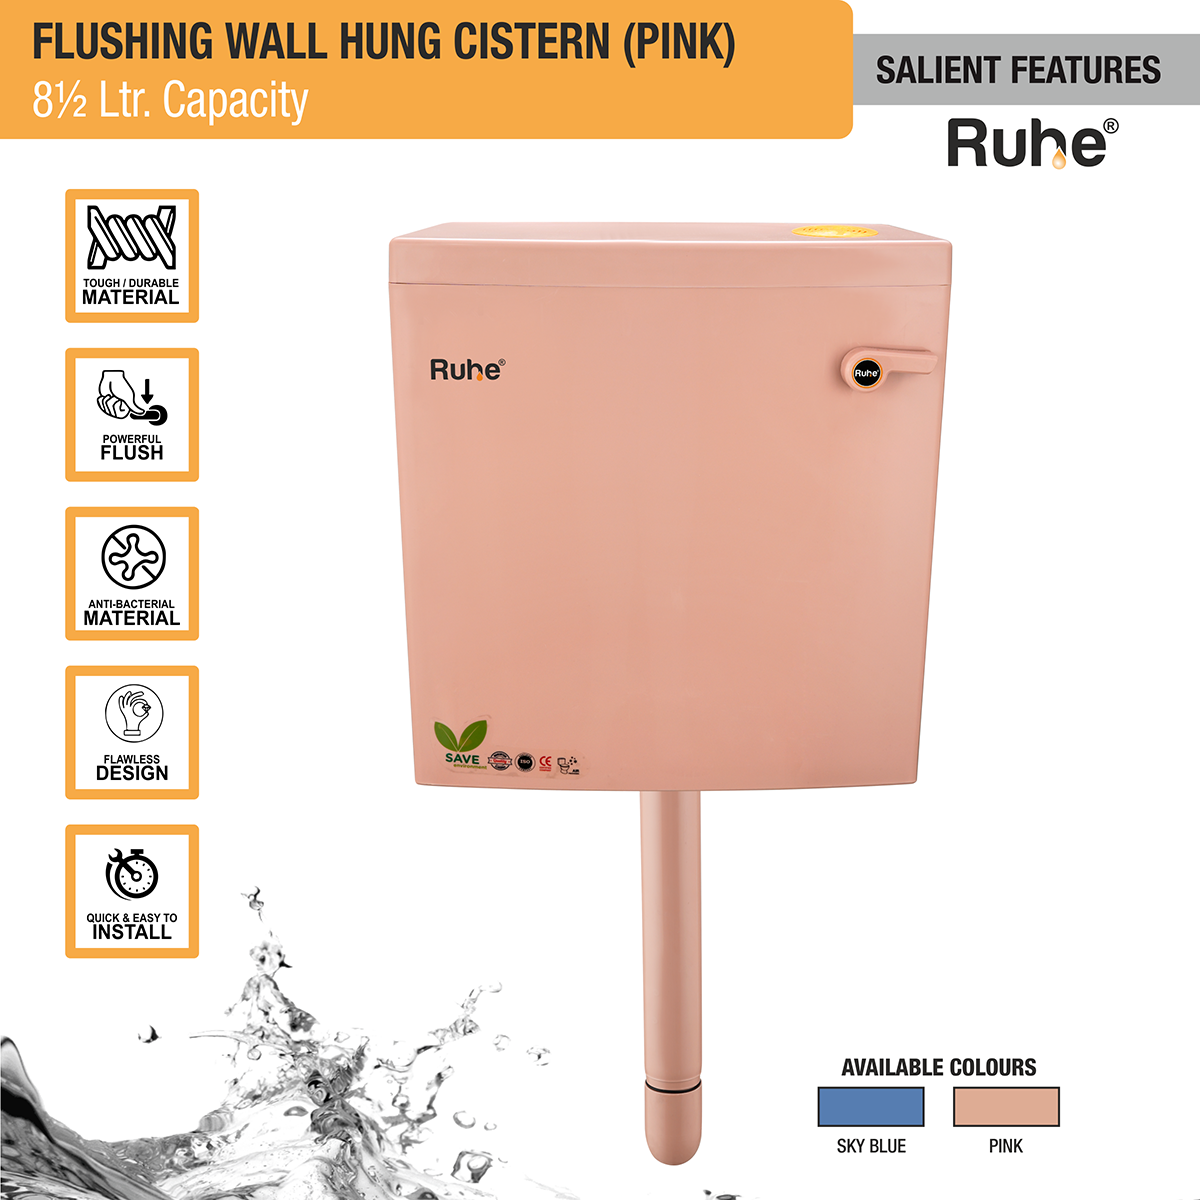 Flushing Wall Hung Cistern 8.5 Ltr. (Pink) features